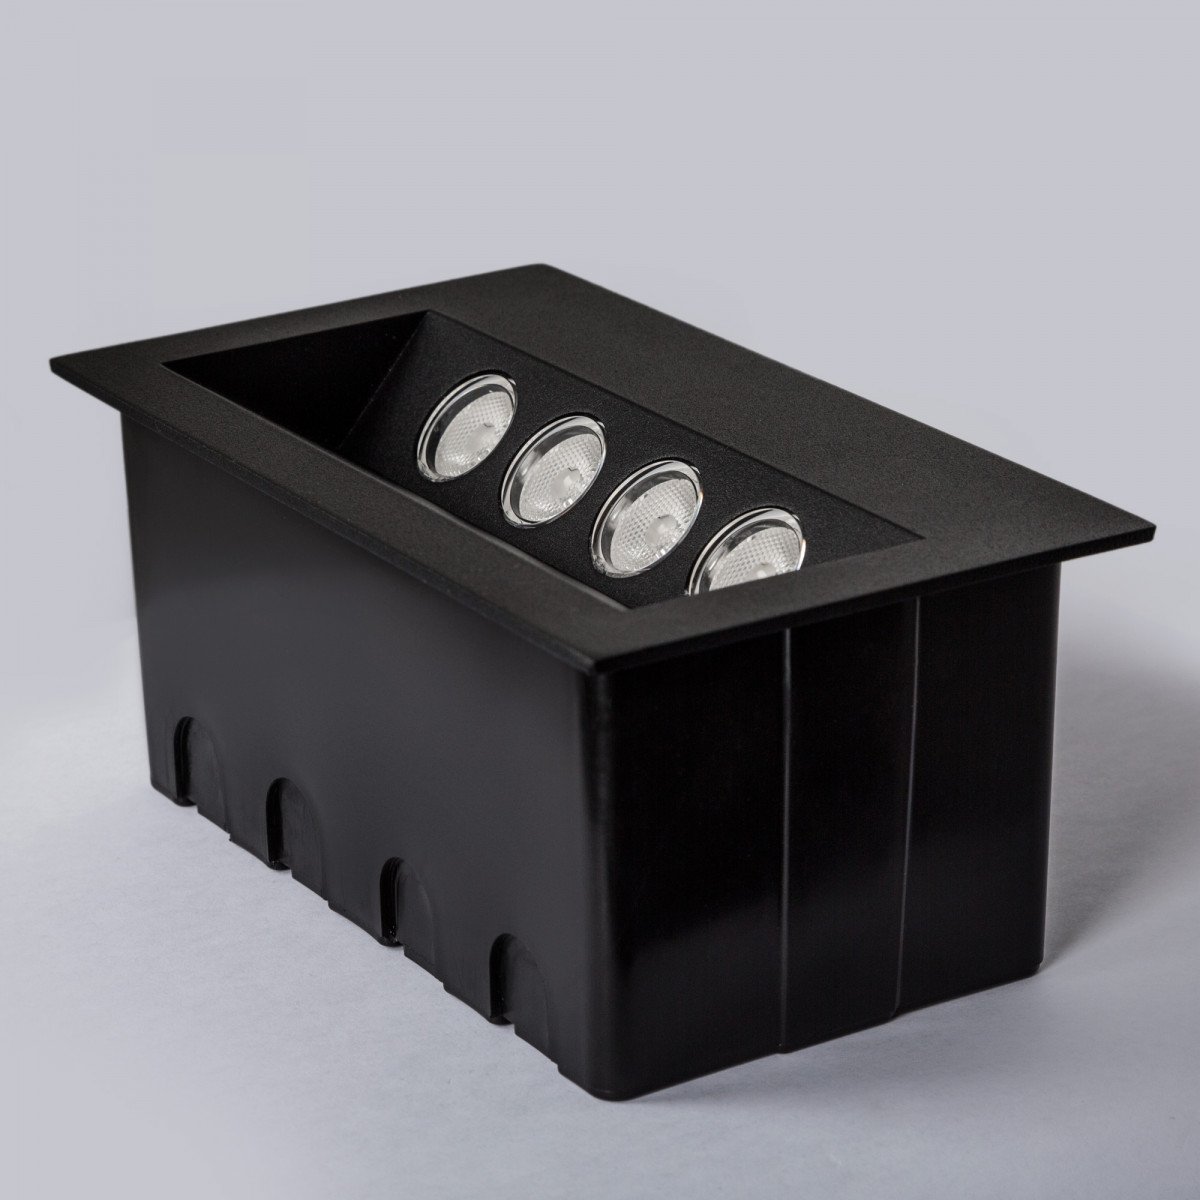 LED recessed wall light Source